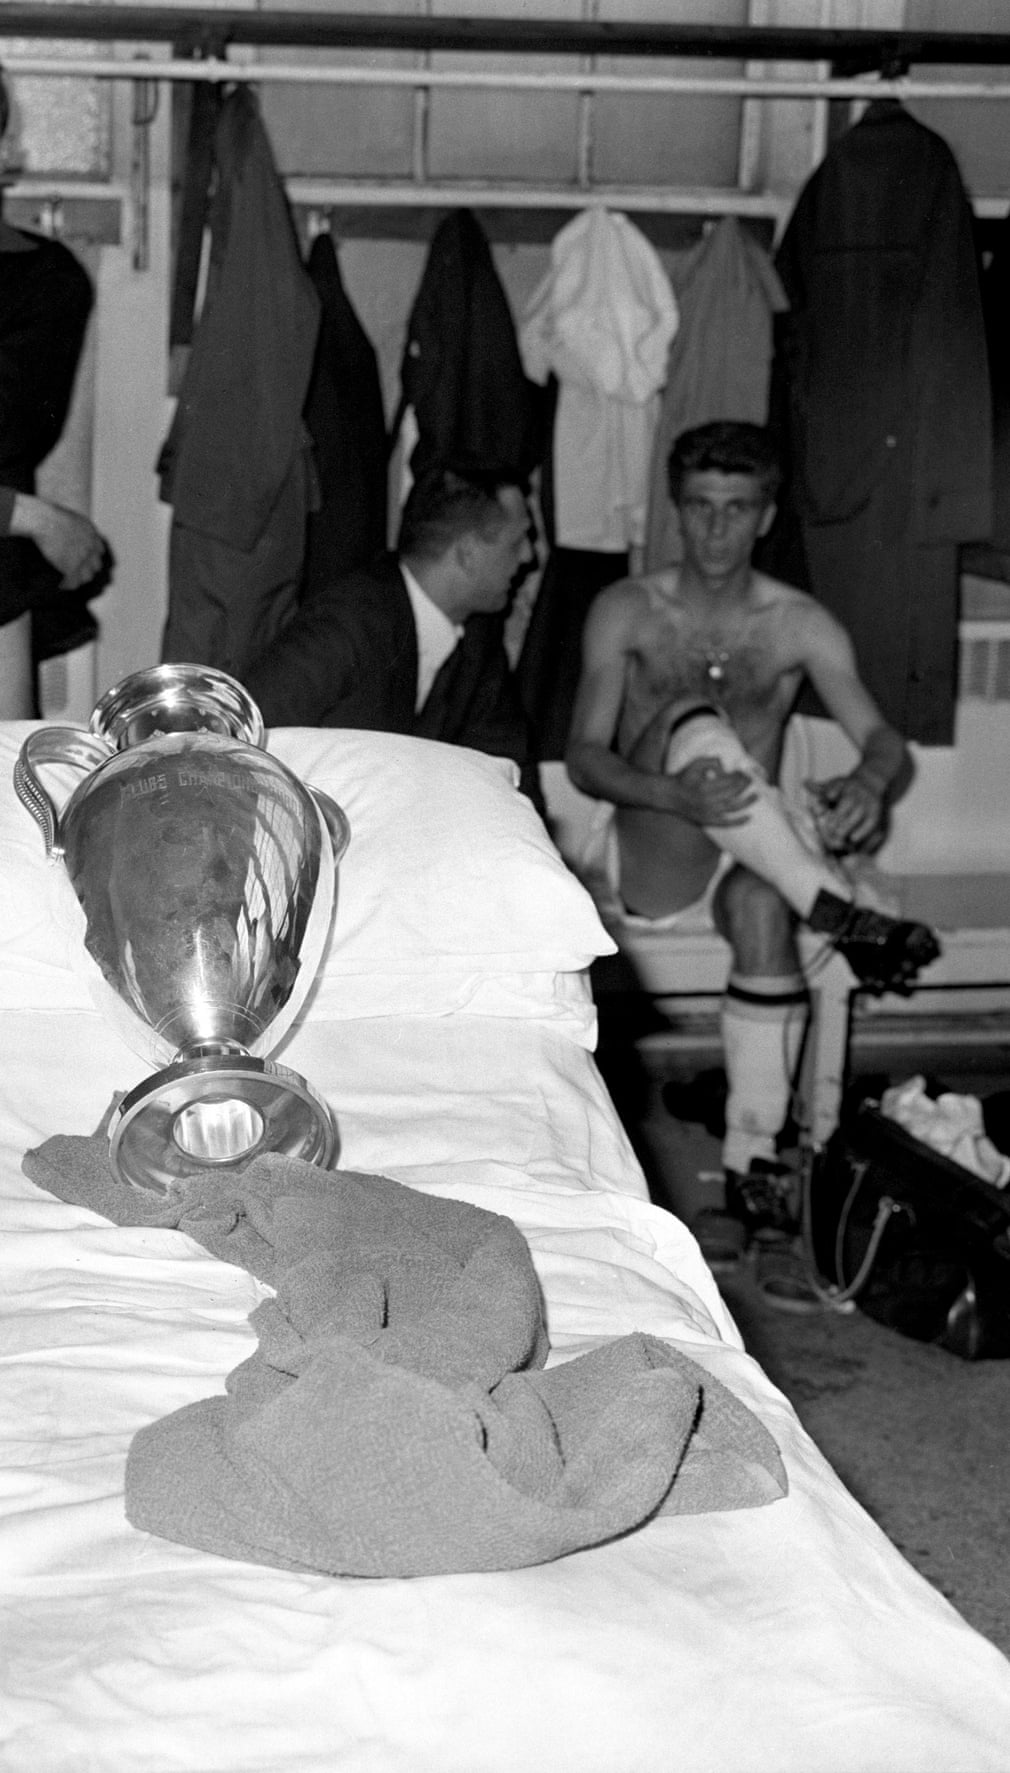 The European Cup lies on the physio table in the Milan dressing room following their 2-1 victory over Benfica in the 1963 European Cup Final